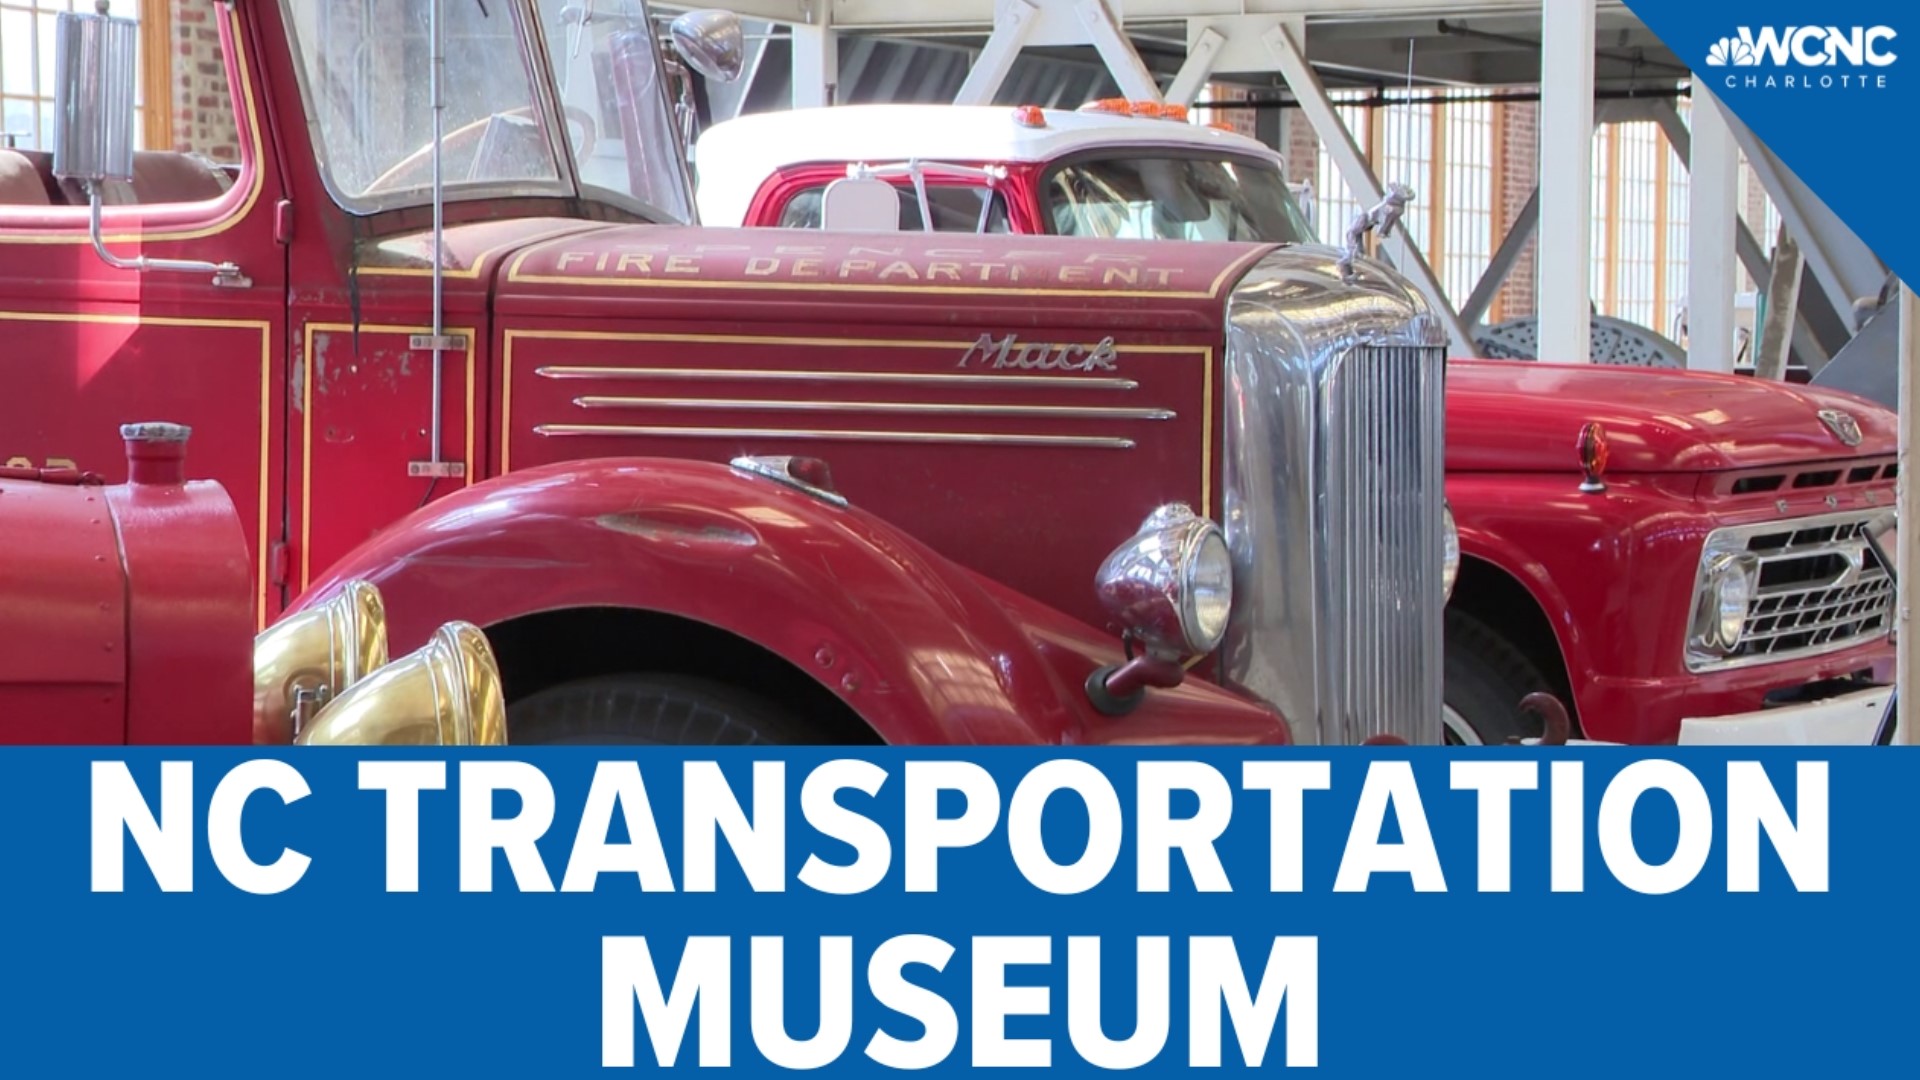 The museum is located just north of Salisbury and houses exhibits including trains, cars, planes and more.